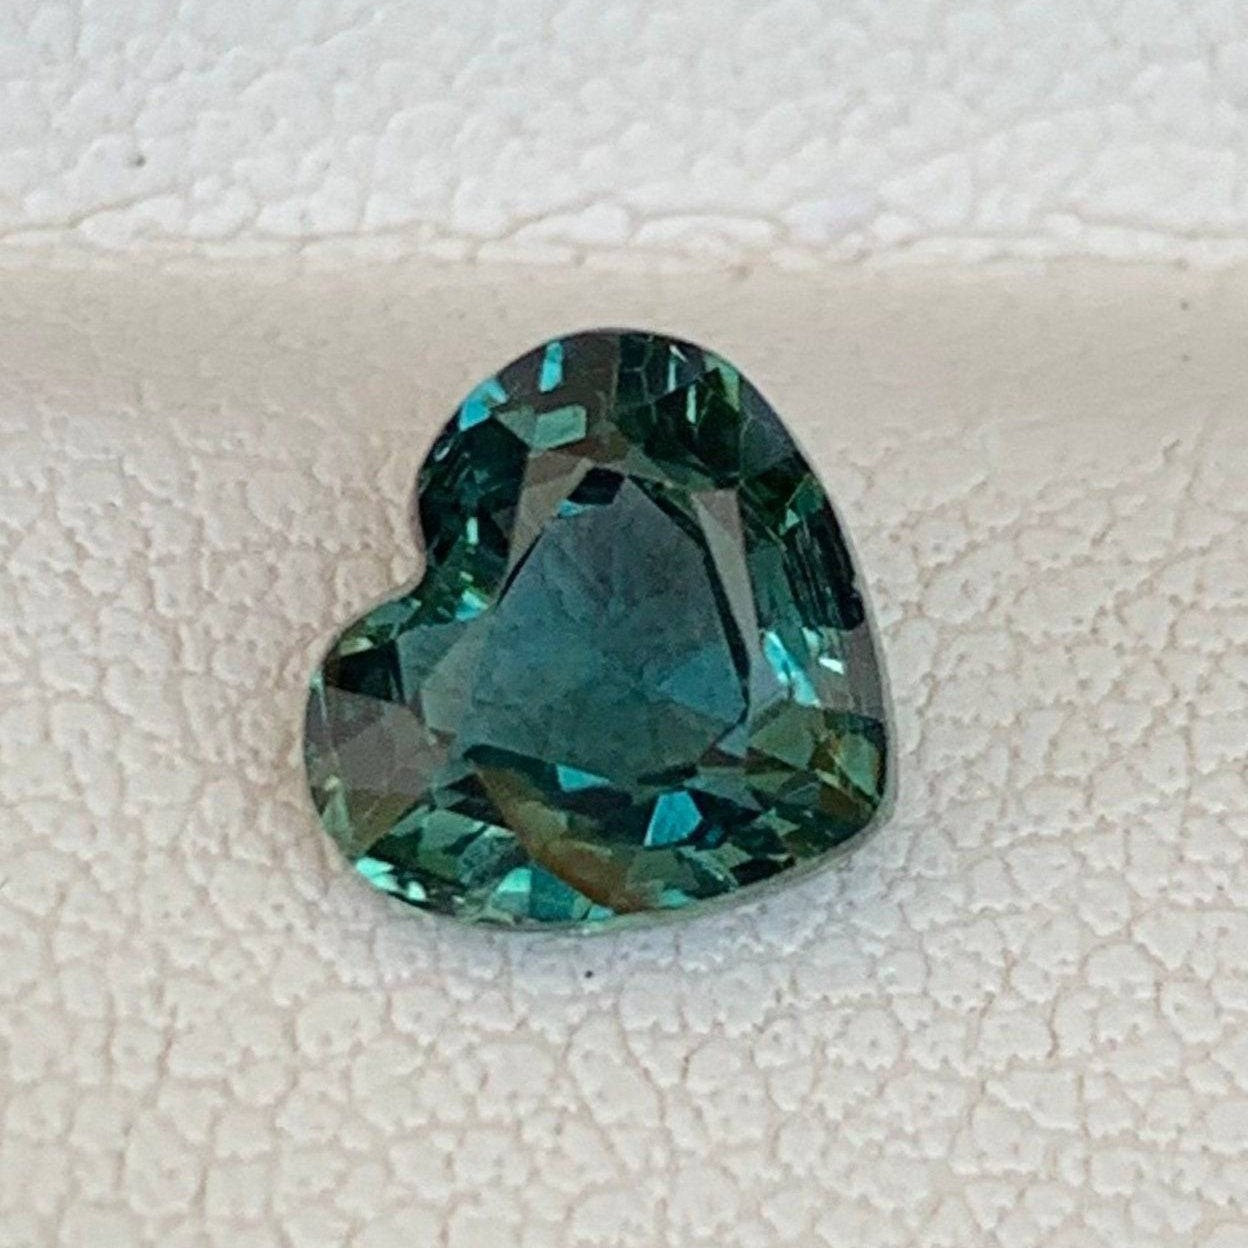 Exquisite 1.52 Ct Unheated Peacock Teal Sapphire Engagement Ring | Natural Gem - Baza Boutique 